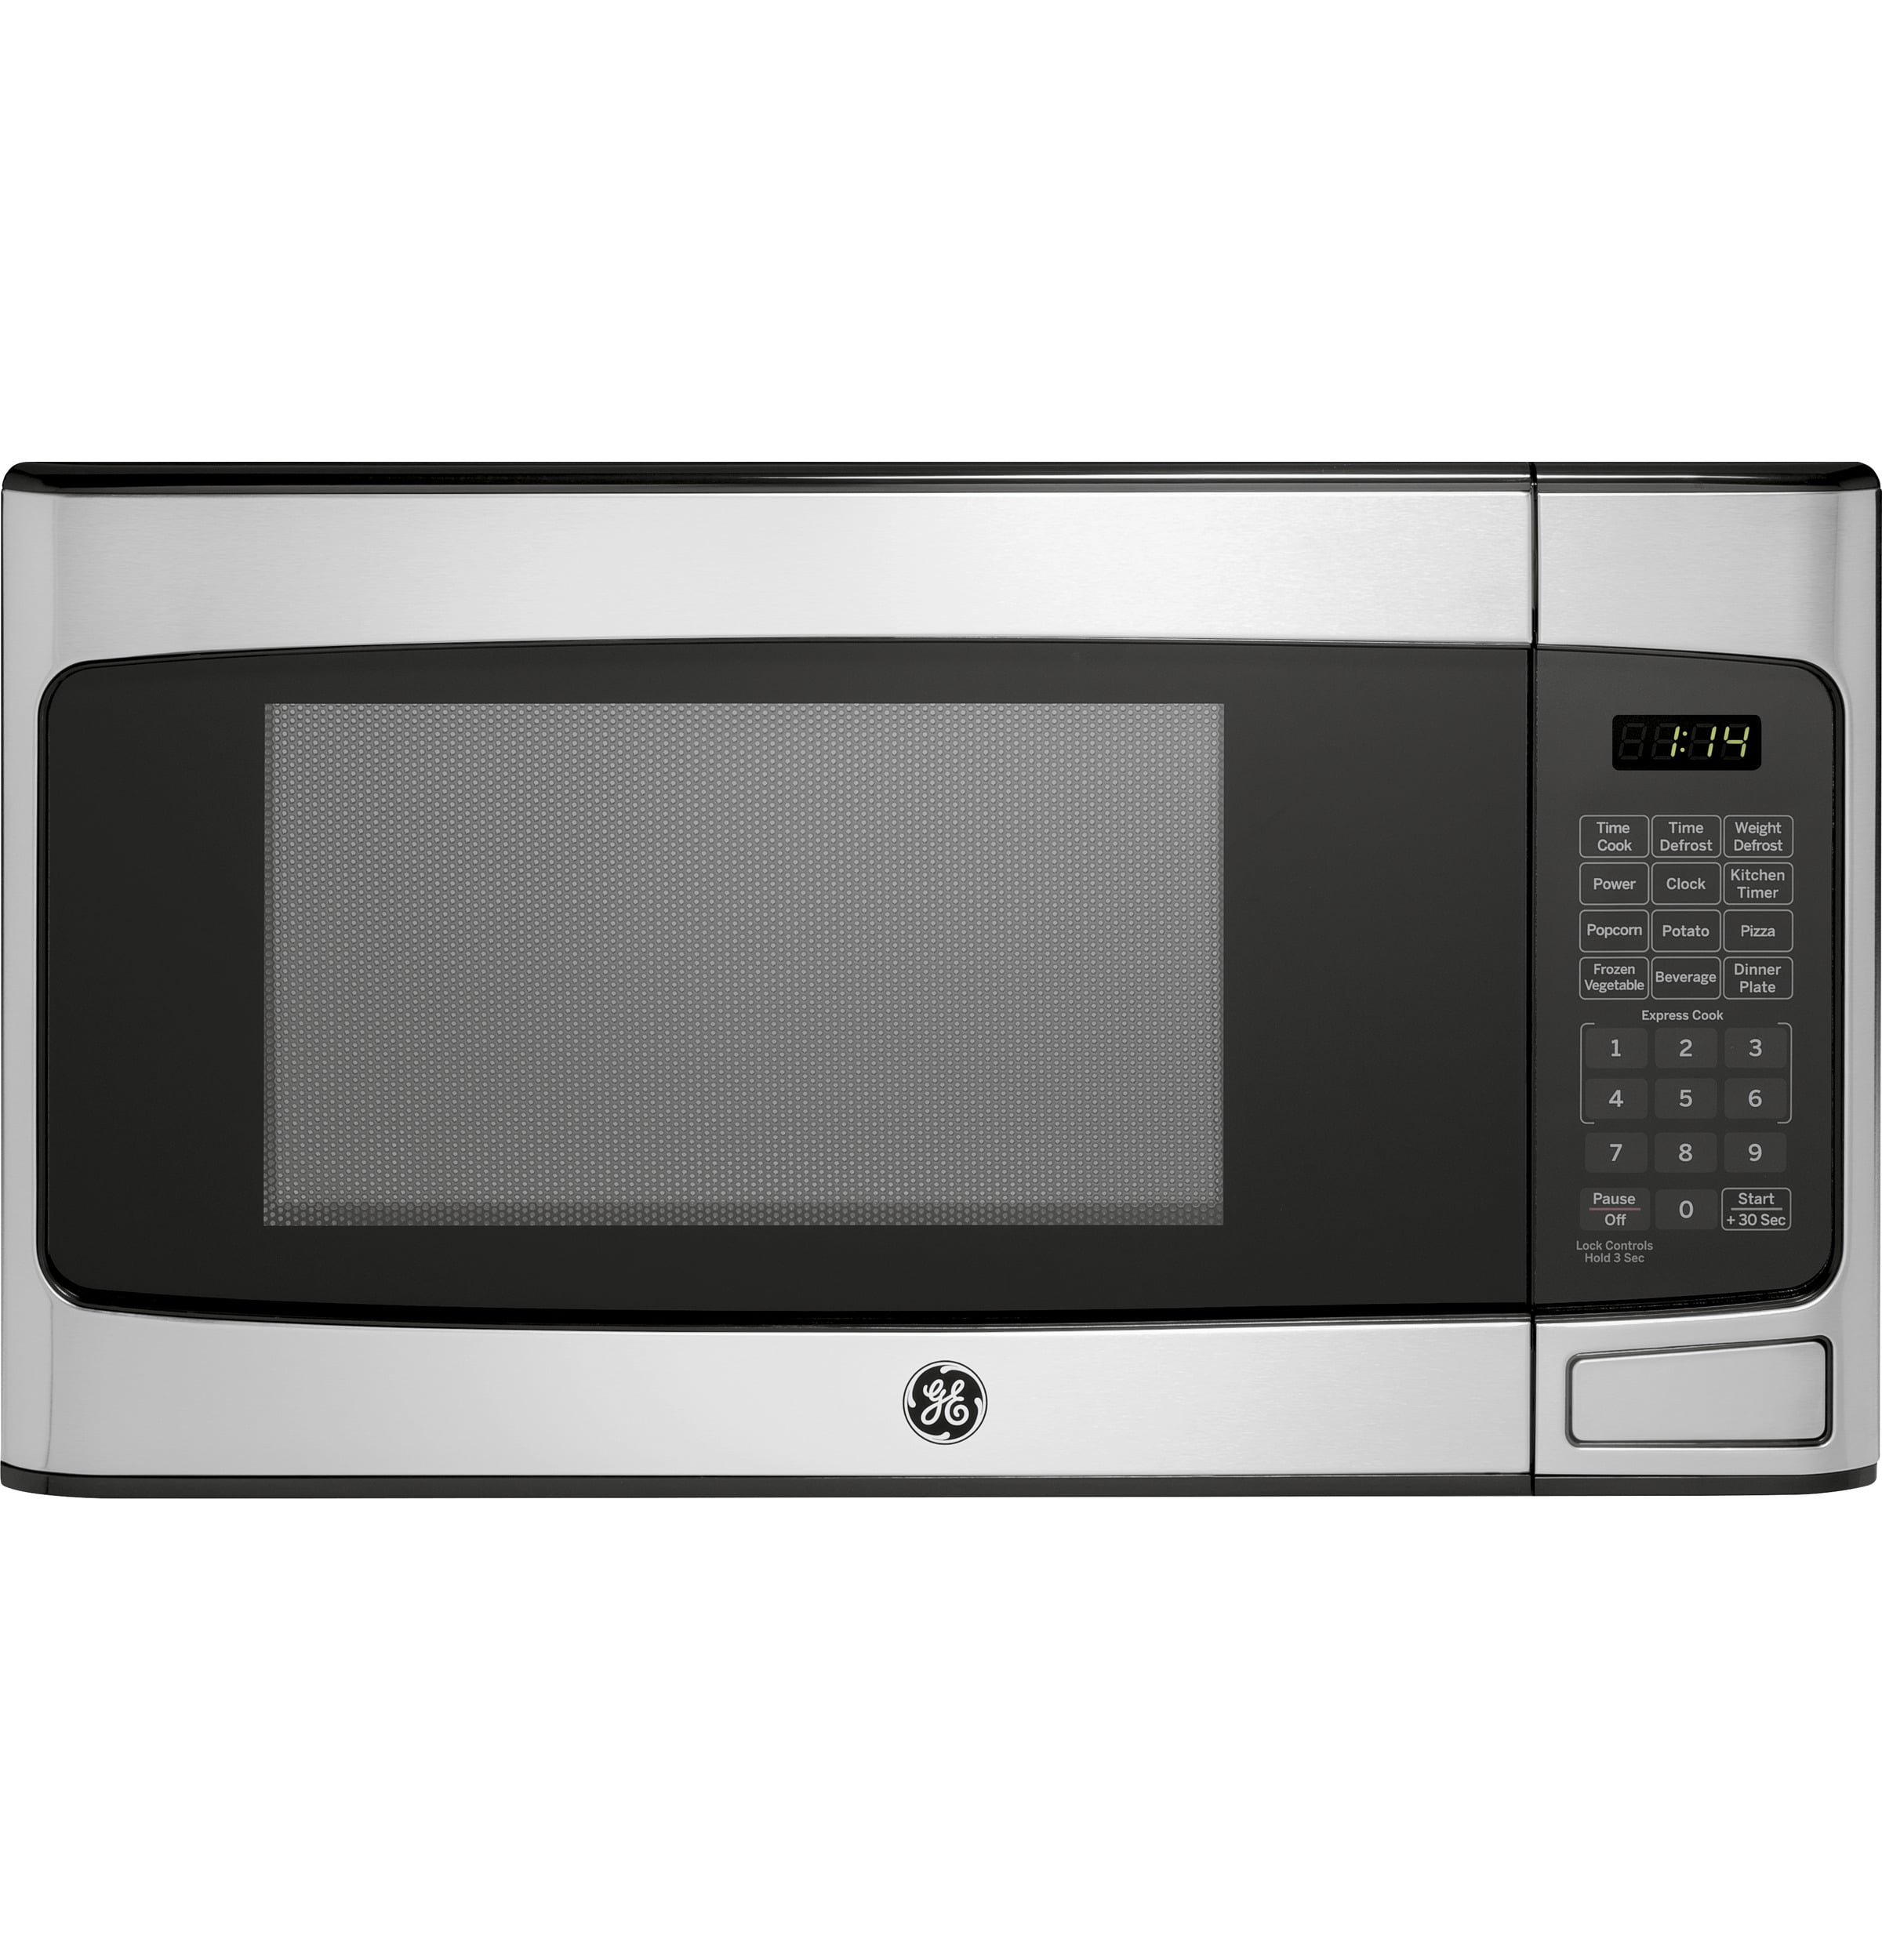 GENERAL ELECTRIC 1.1 Cu. Ft. Countertop Stainless Steel Microwave Oven